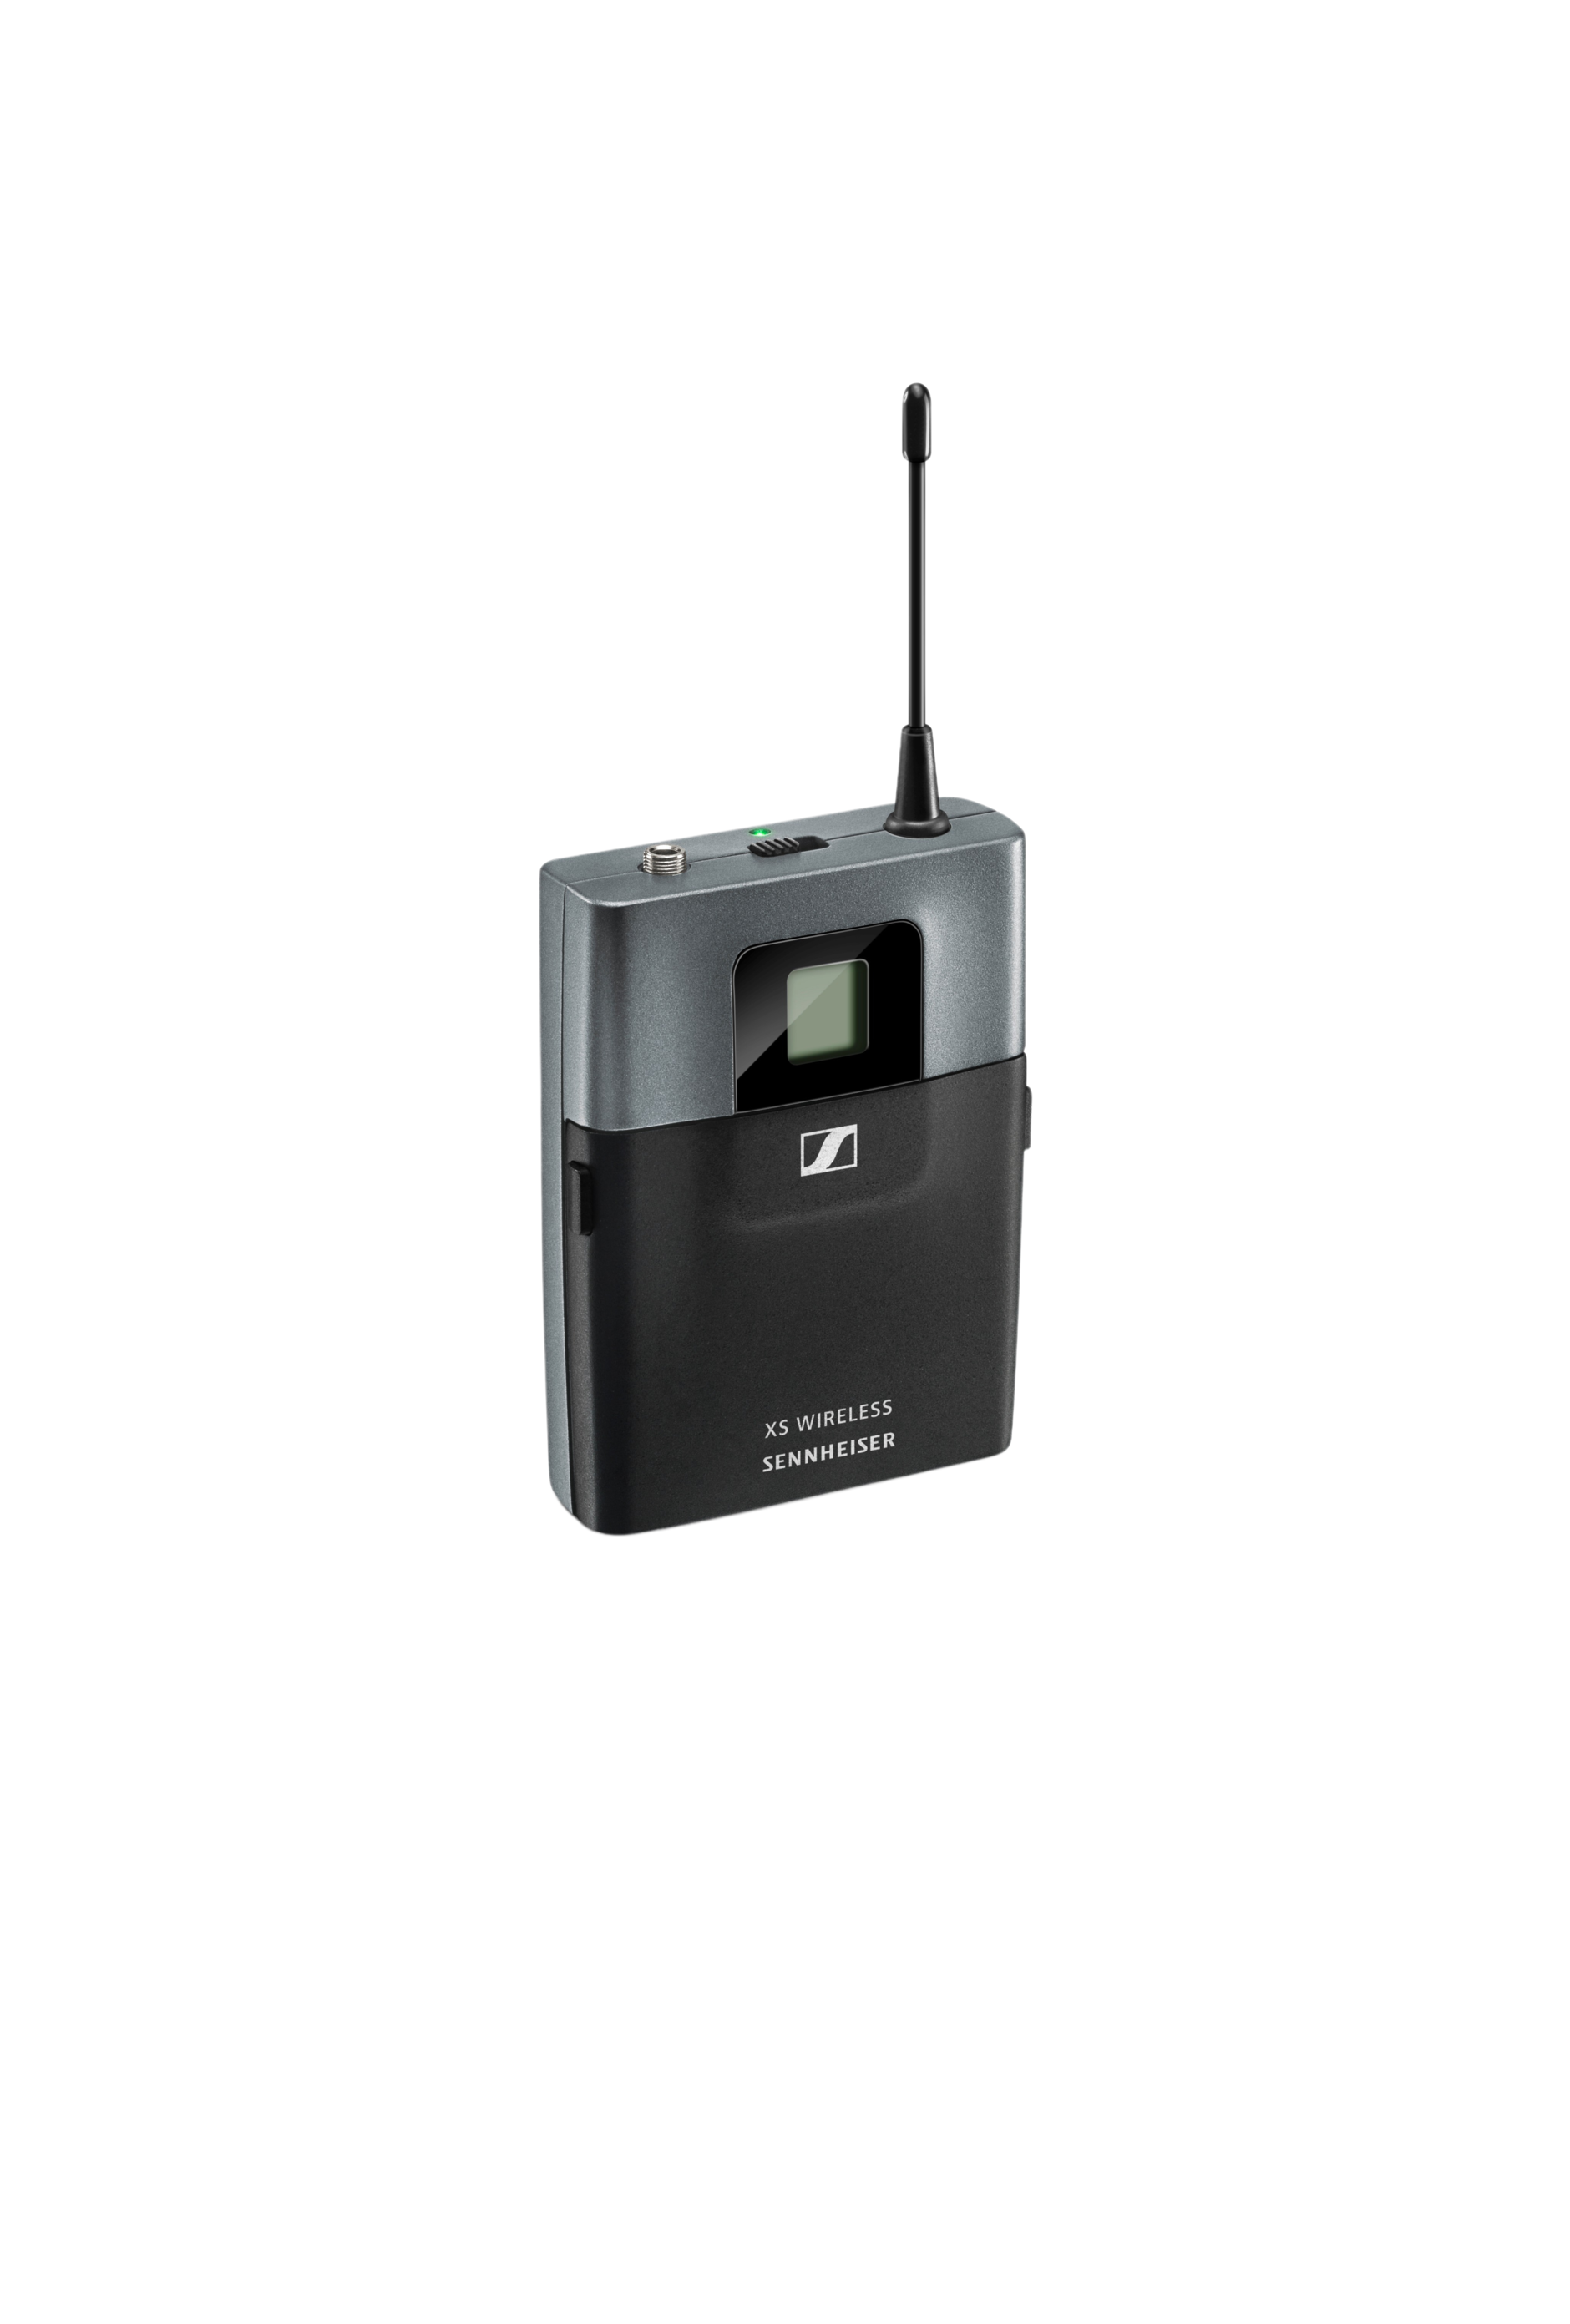 XS_Wireless_2_SK_Bodypack_Transmitter_product_shot_cutout_front_view.png